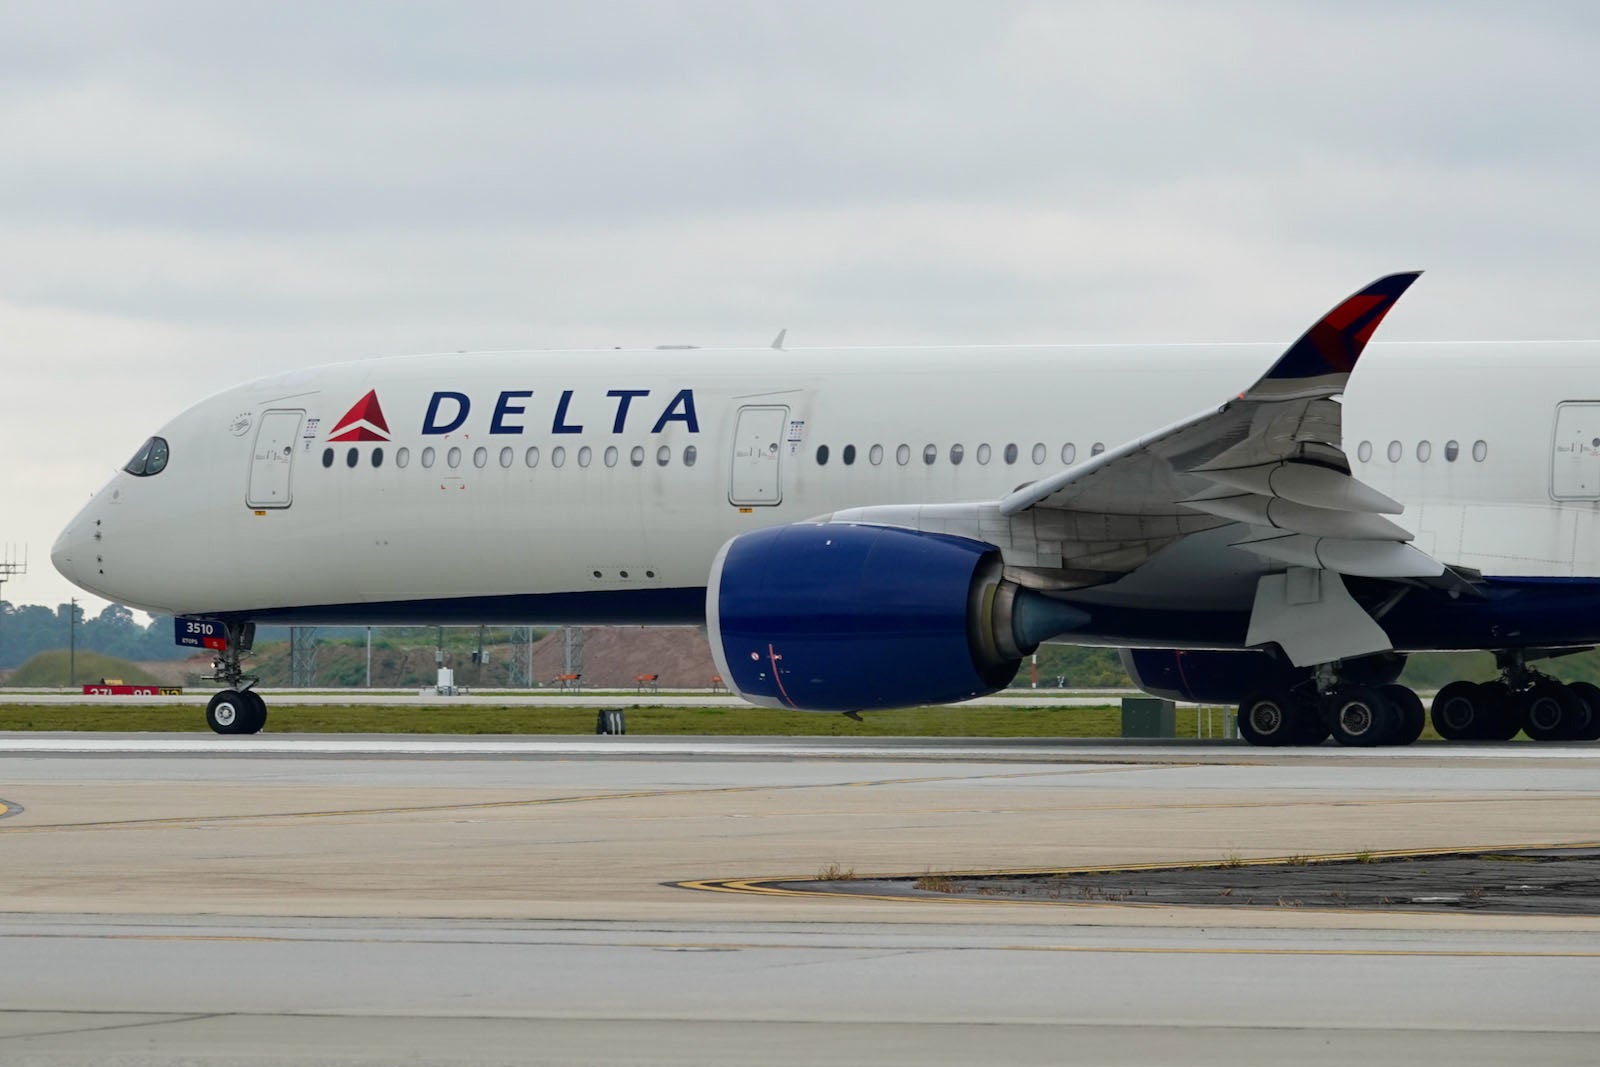 exterior of a Delta plane on the runway